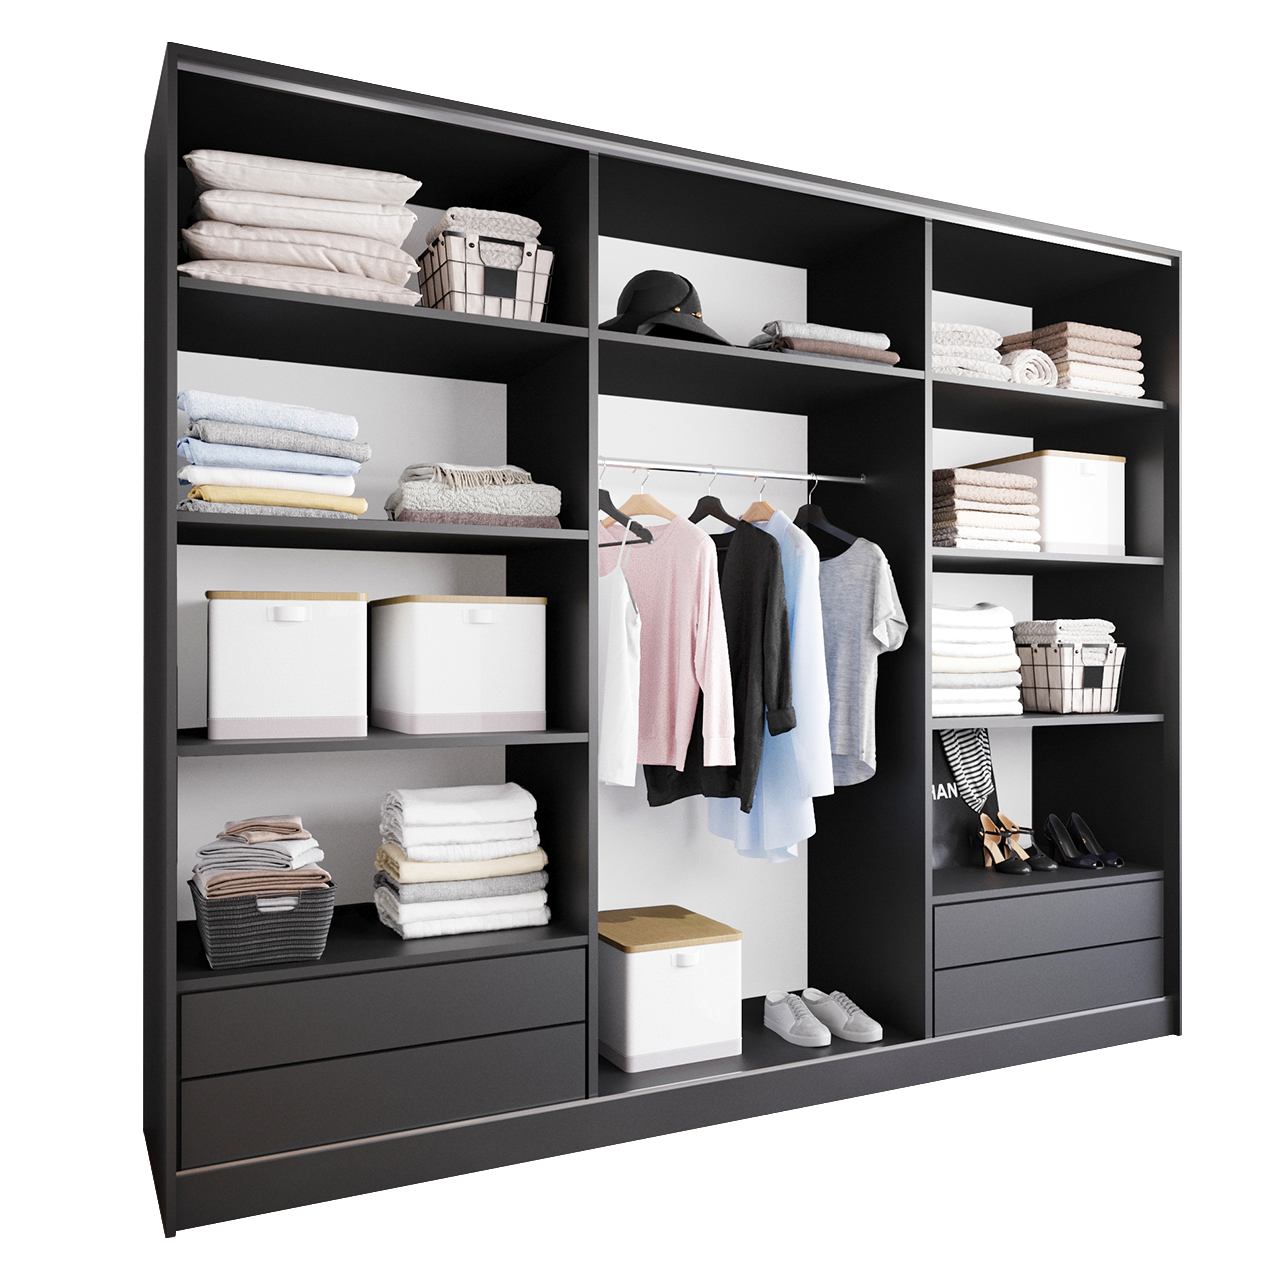 Sliding Wardrobe with Drawers BRITTO D 270 black